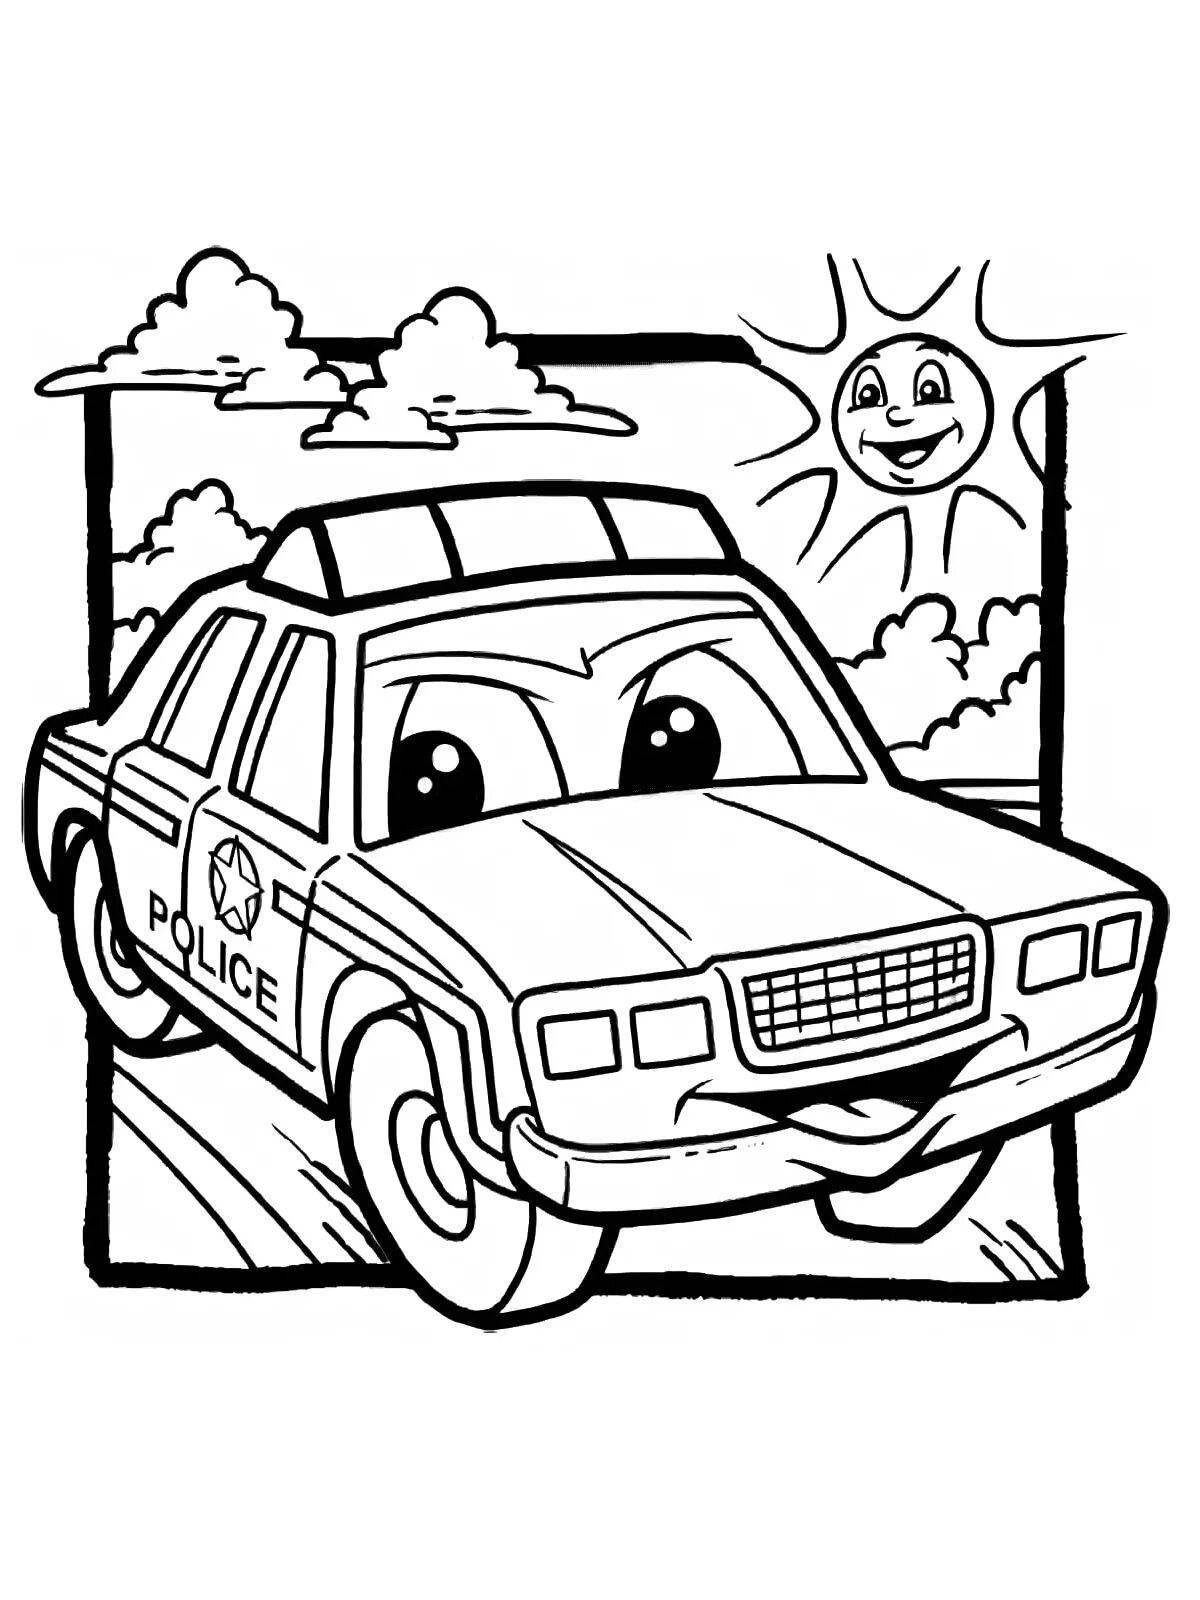 Dazzling police truck coloring page